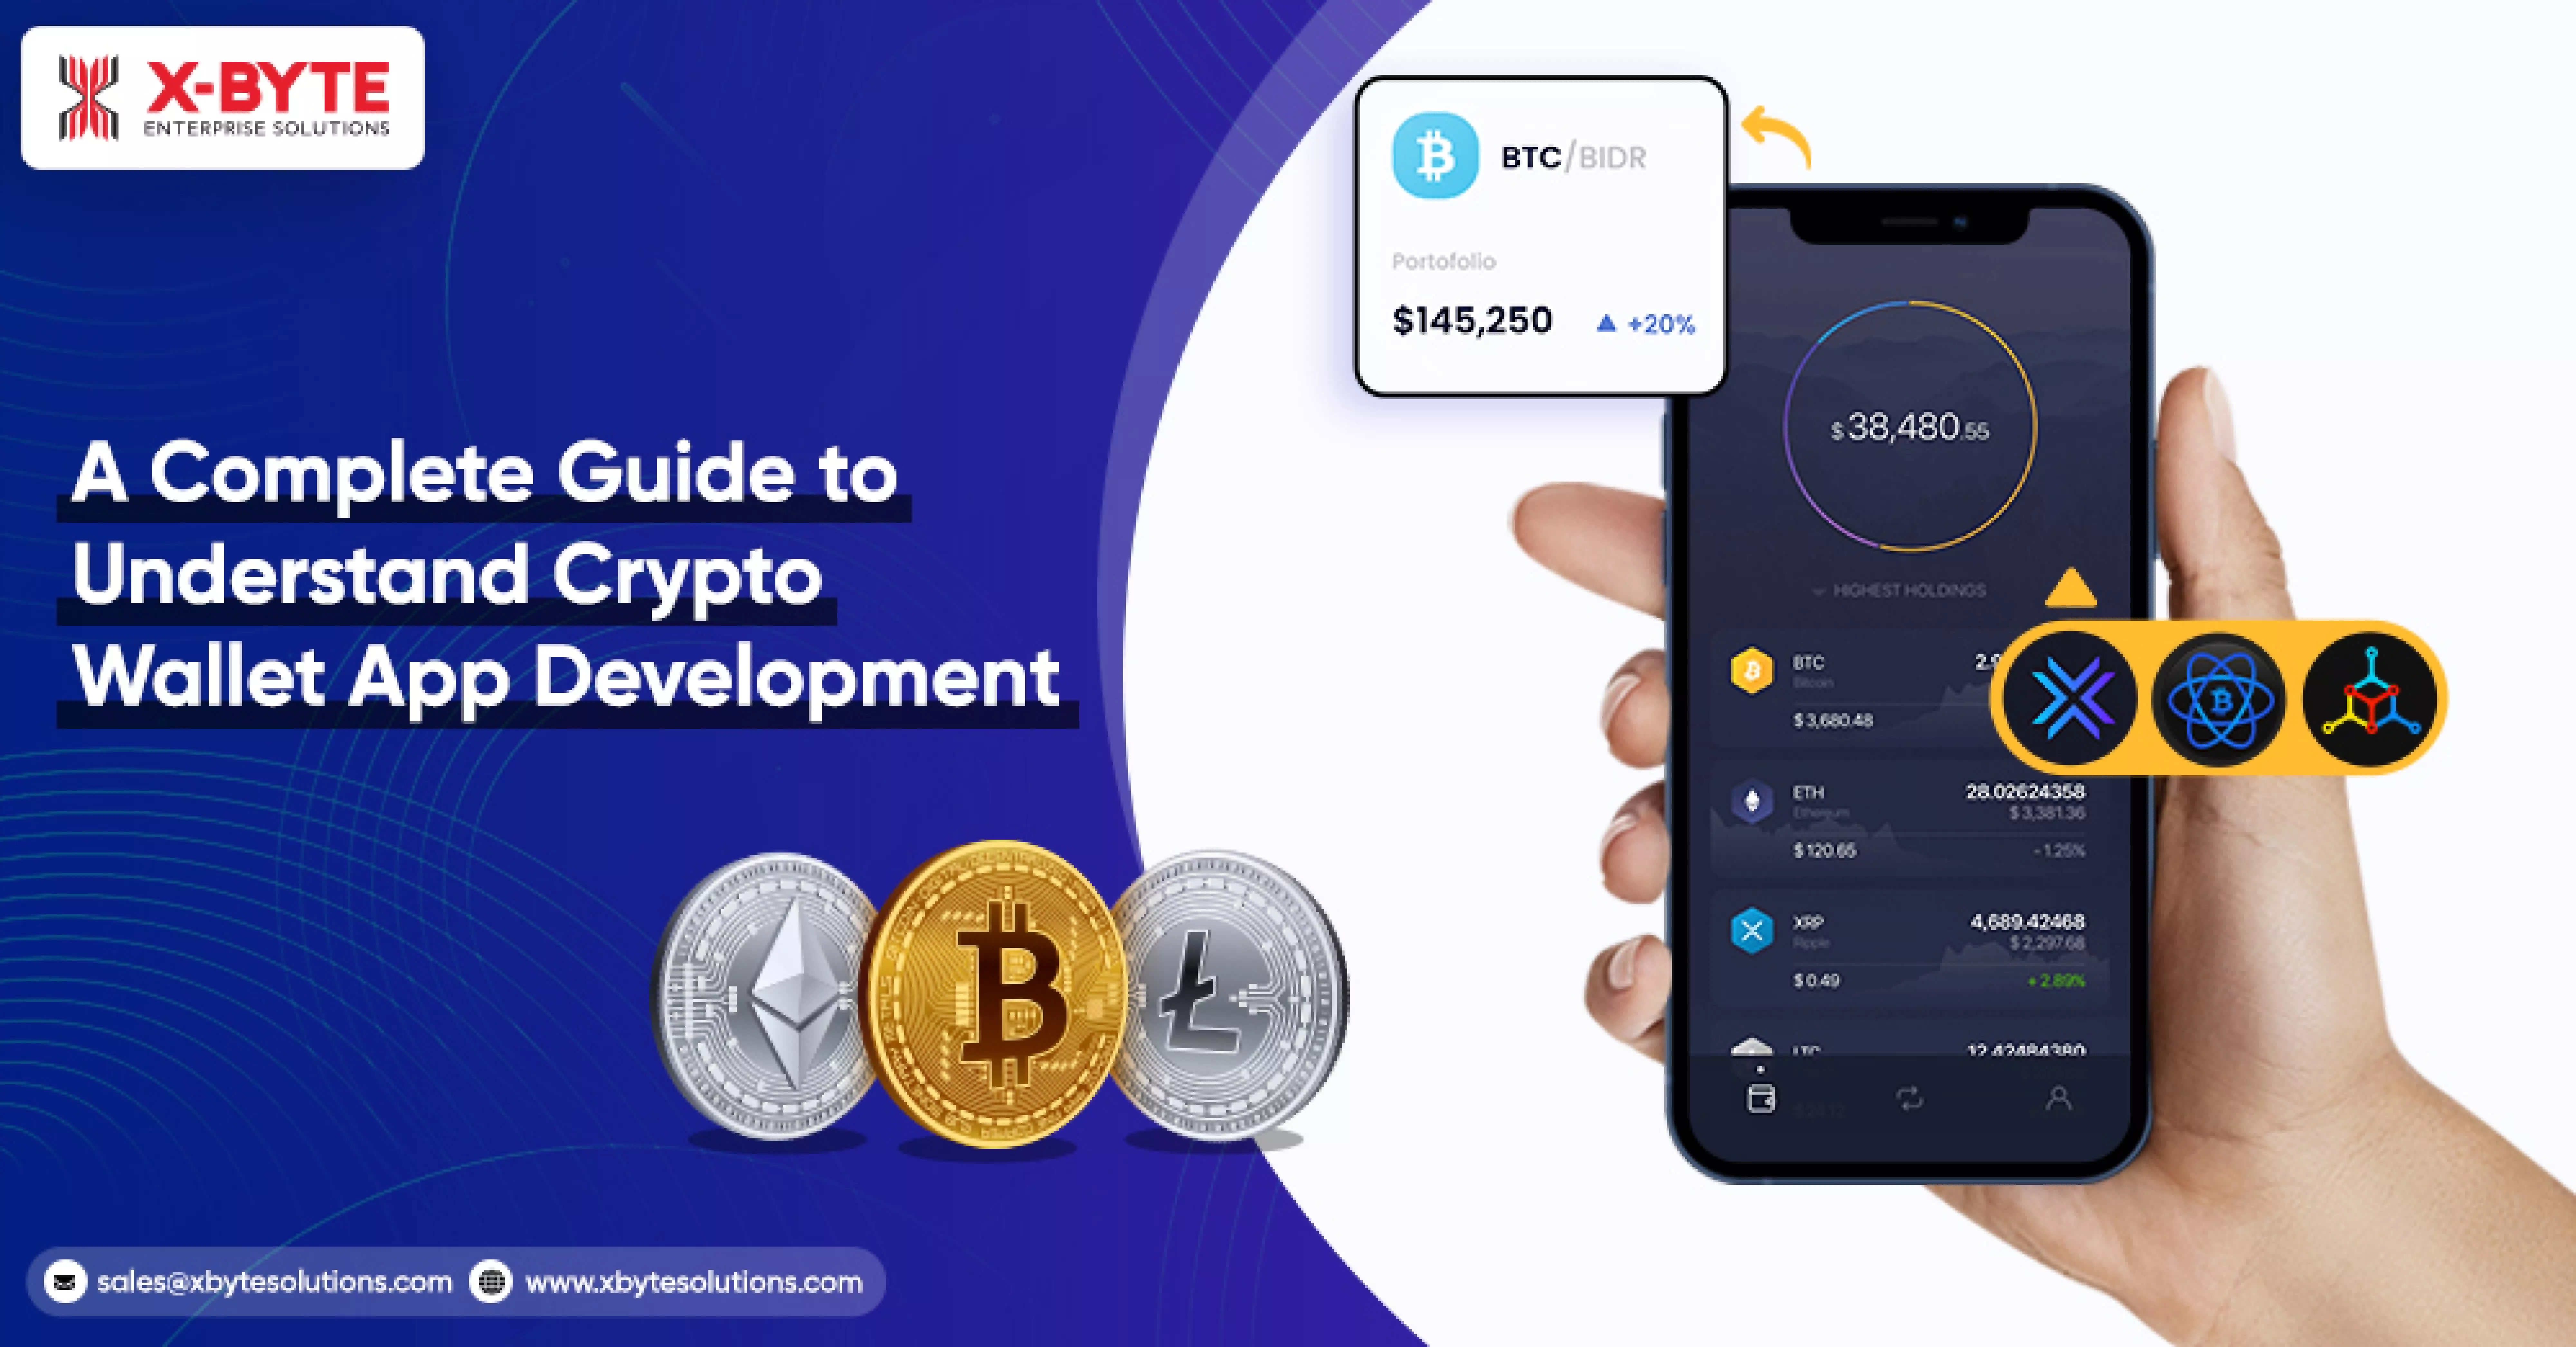 A Complete Guide to Understand Crypto Wallet App Development